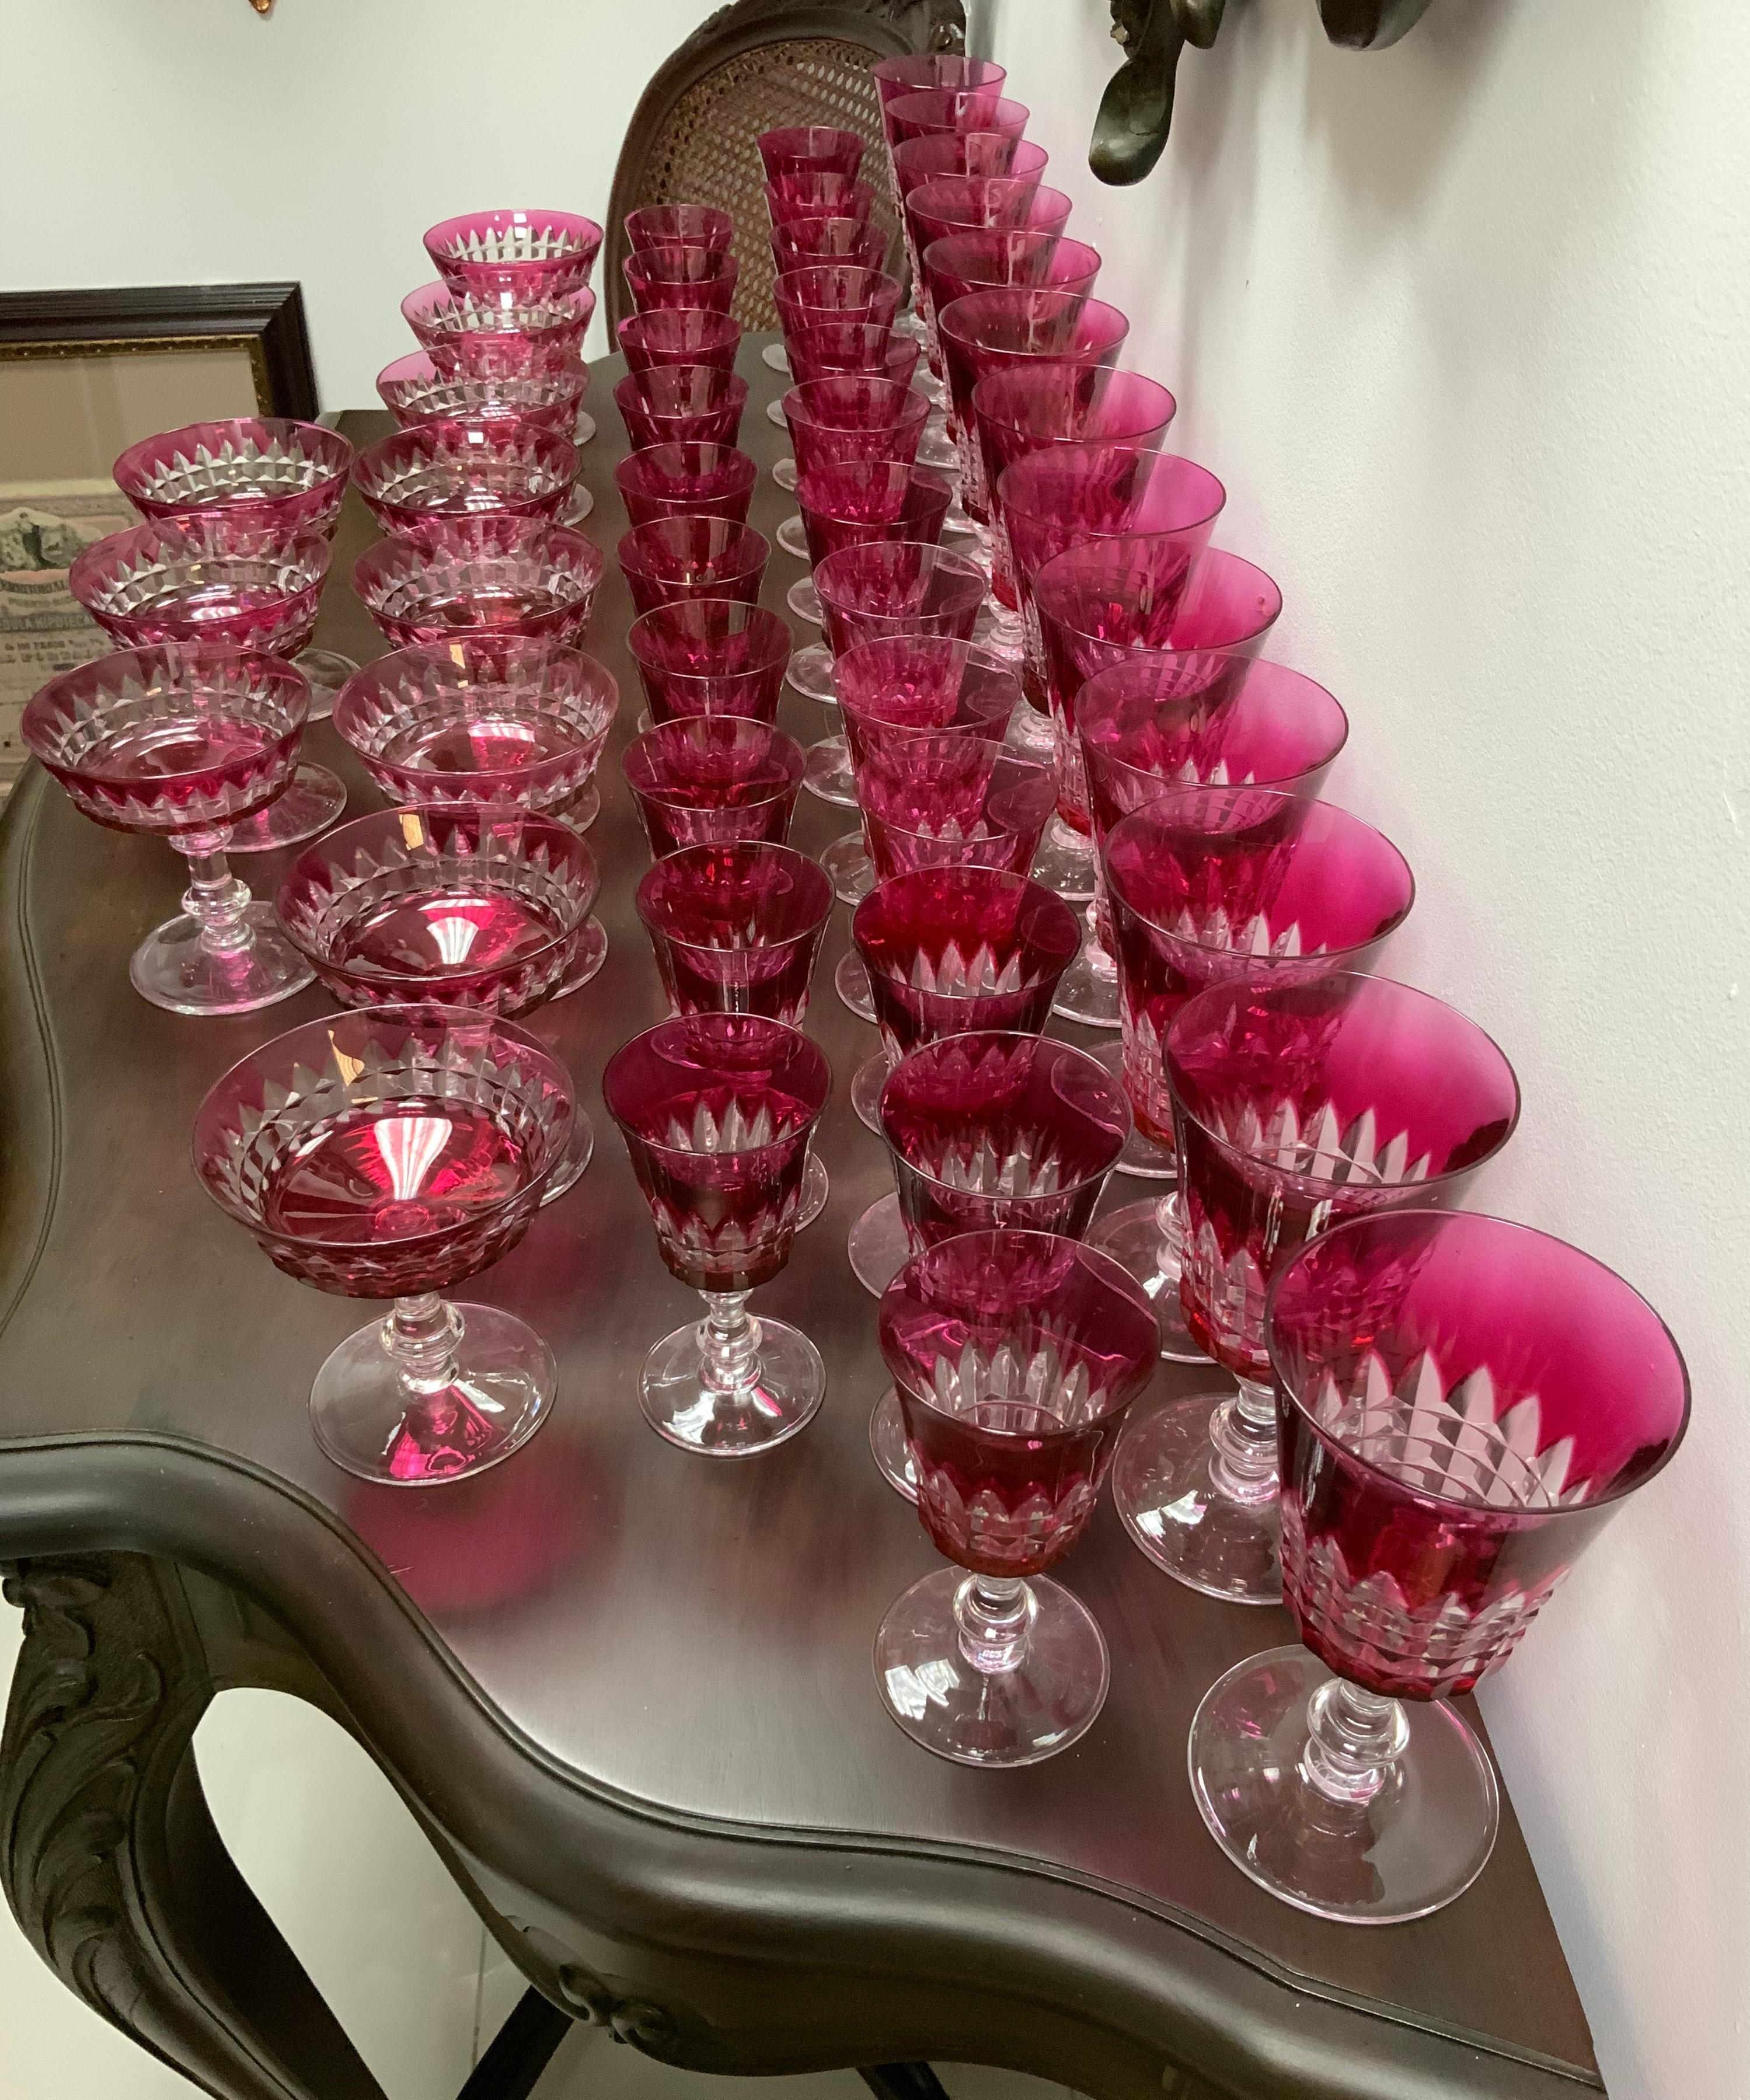 This is a set of forty five Val Saint Lambert Esneux pattern cranberry cut to clear crystal glassware. All of them are bell shaped, except one group that is circular. The bowl of the glasses are adorned with feathers pointing up and a pattern of